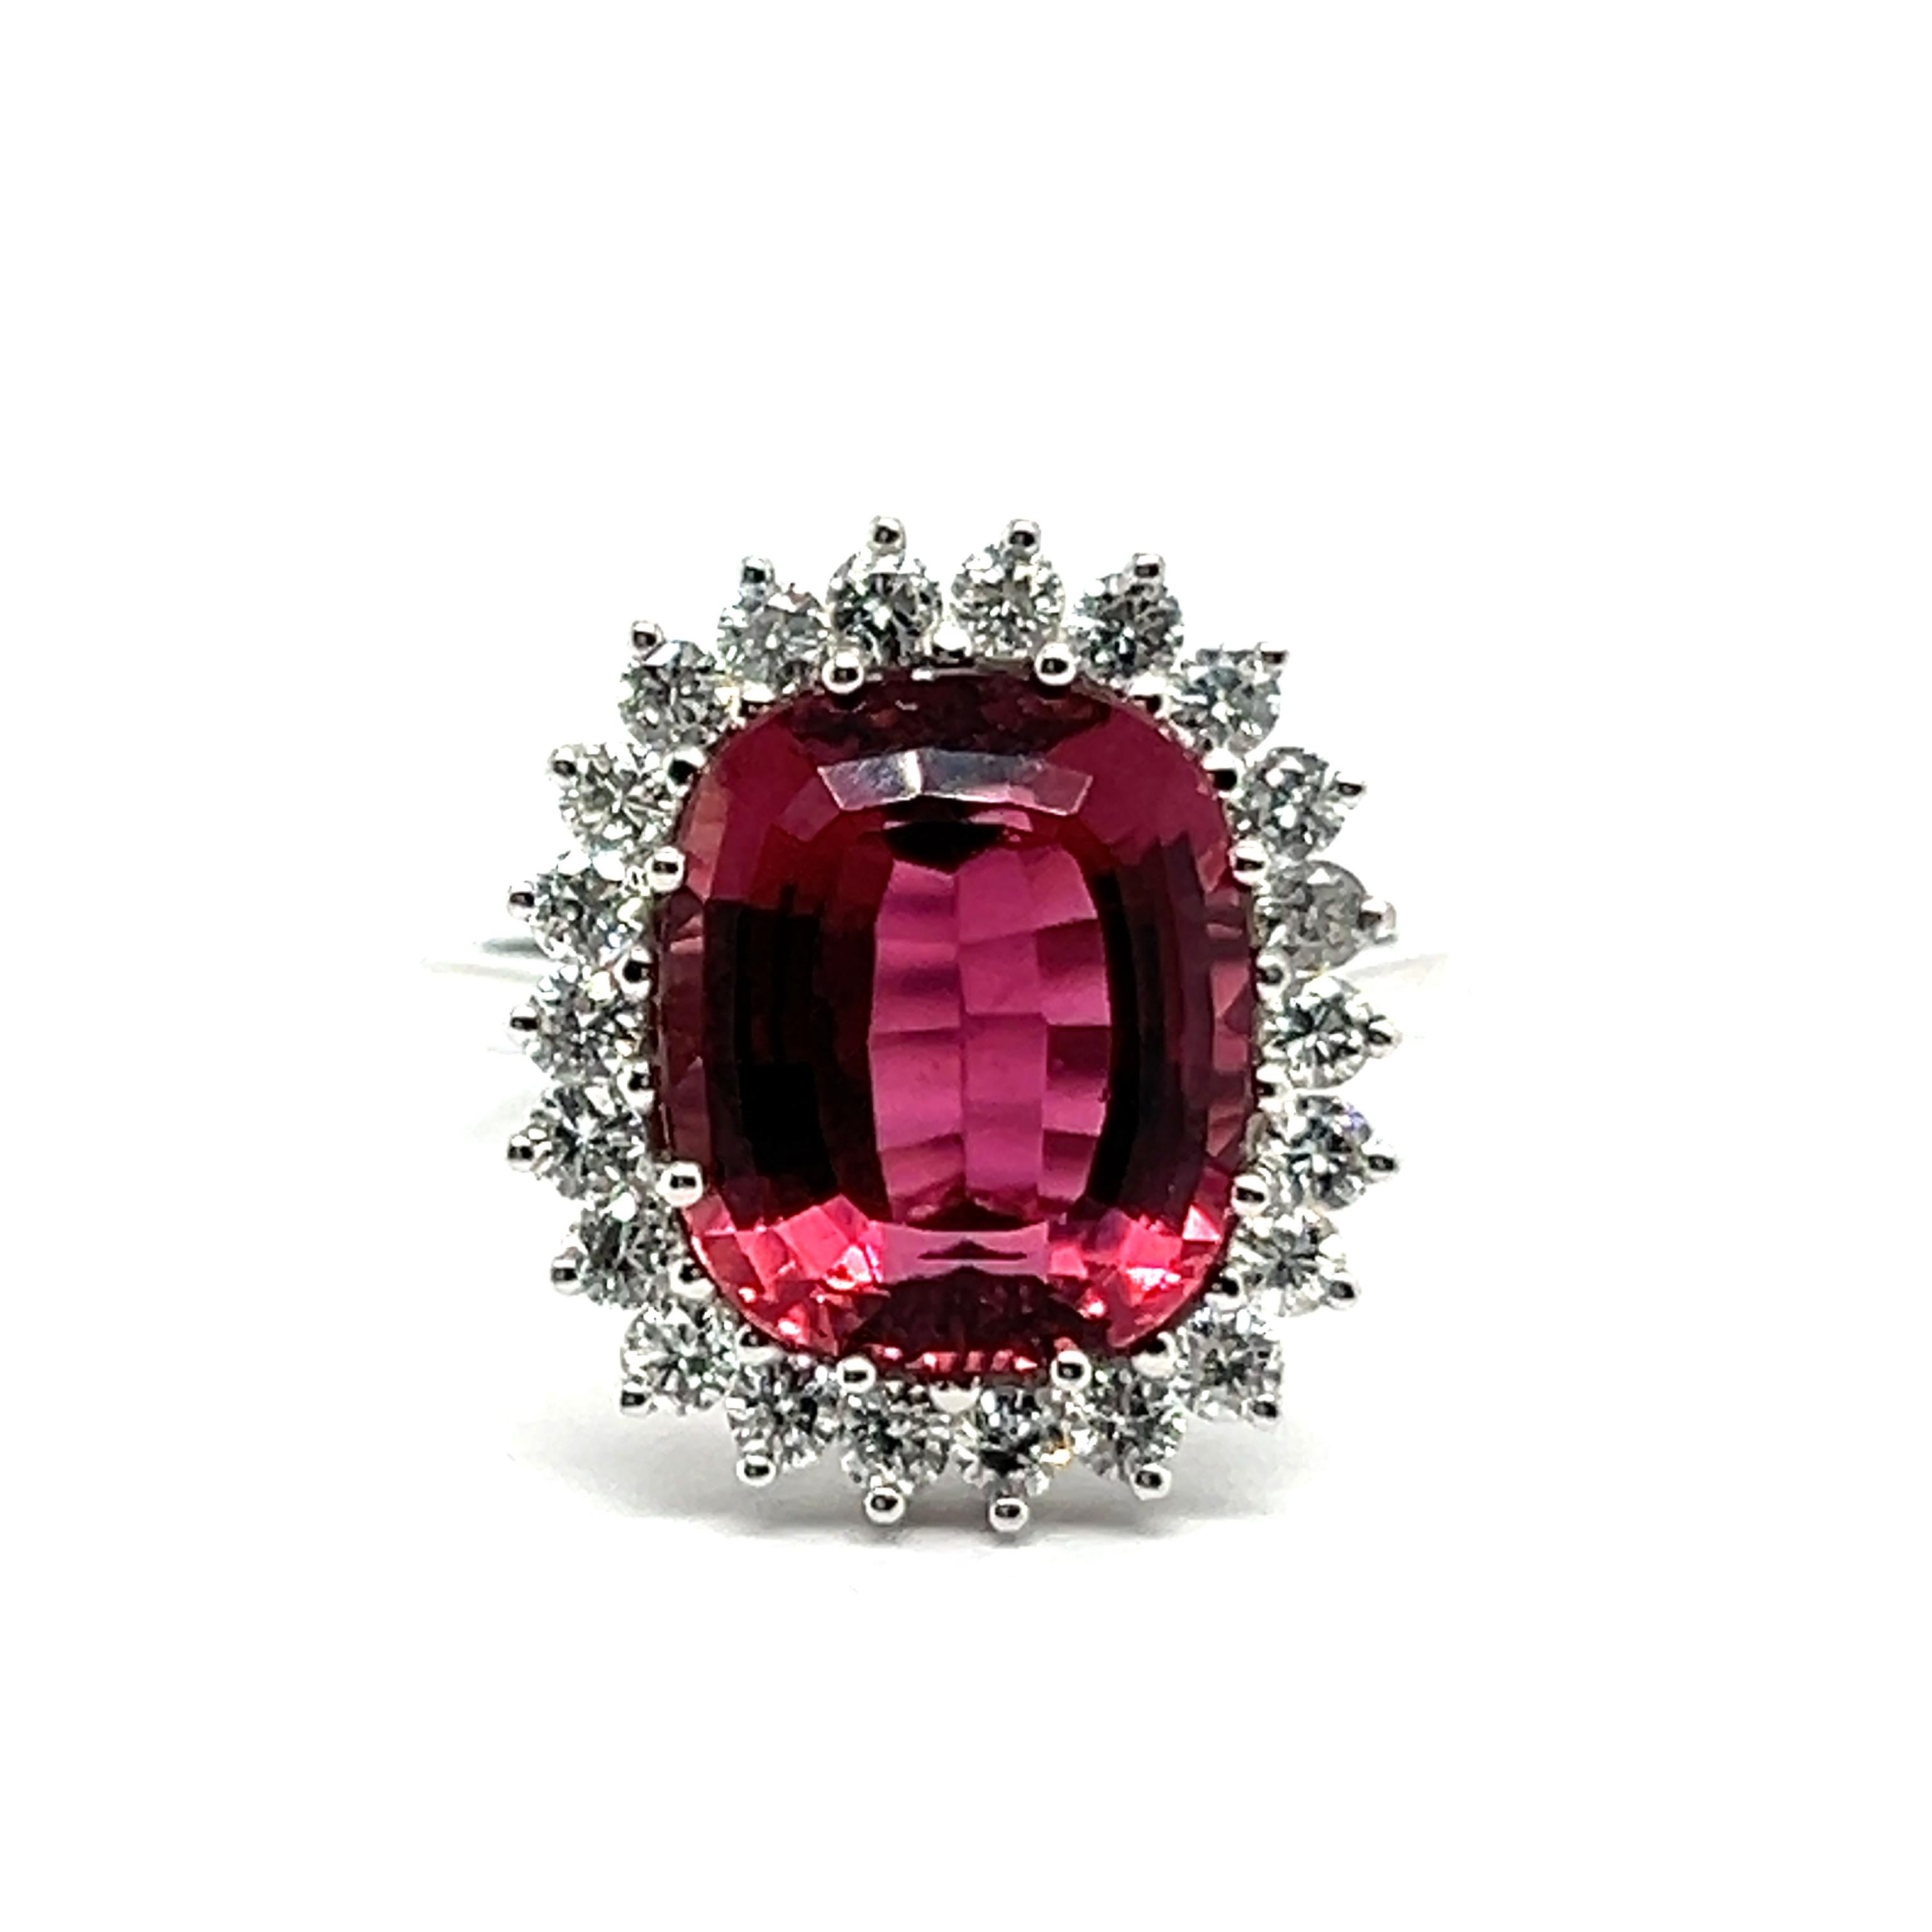 Presenting a classic tourmaline and diamond ring set in 18 Karat white gold. The main character of this piece is a 6.10-carat raspberry-pink tourmaline, delicately framed by brilliant-cut diamonds totaling 0.66 carats in G-H color and VS